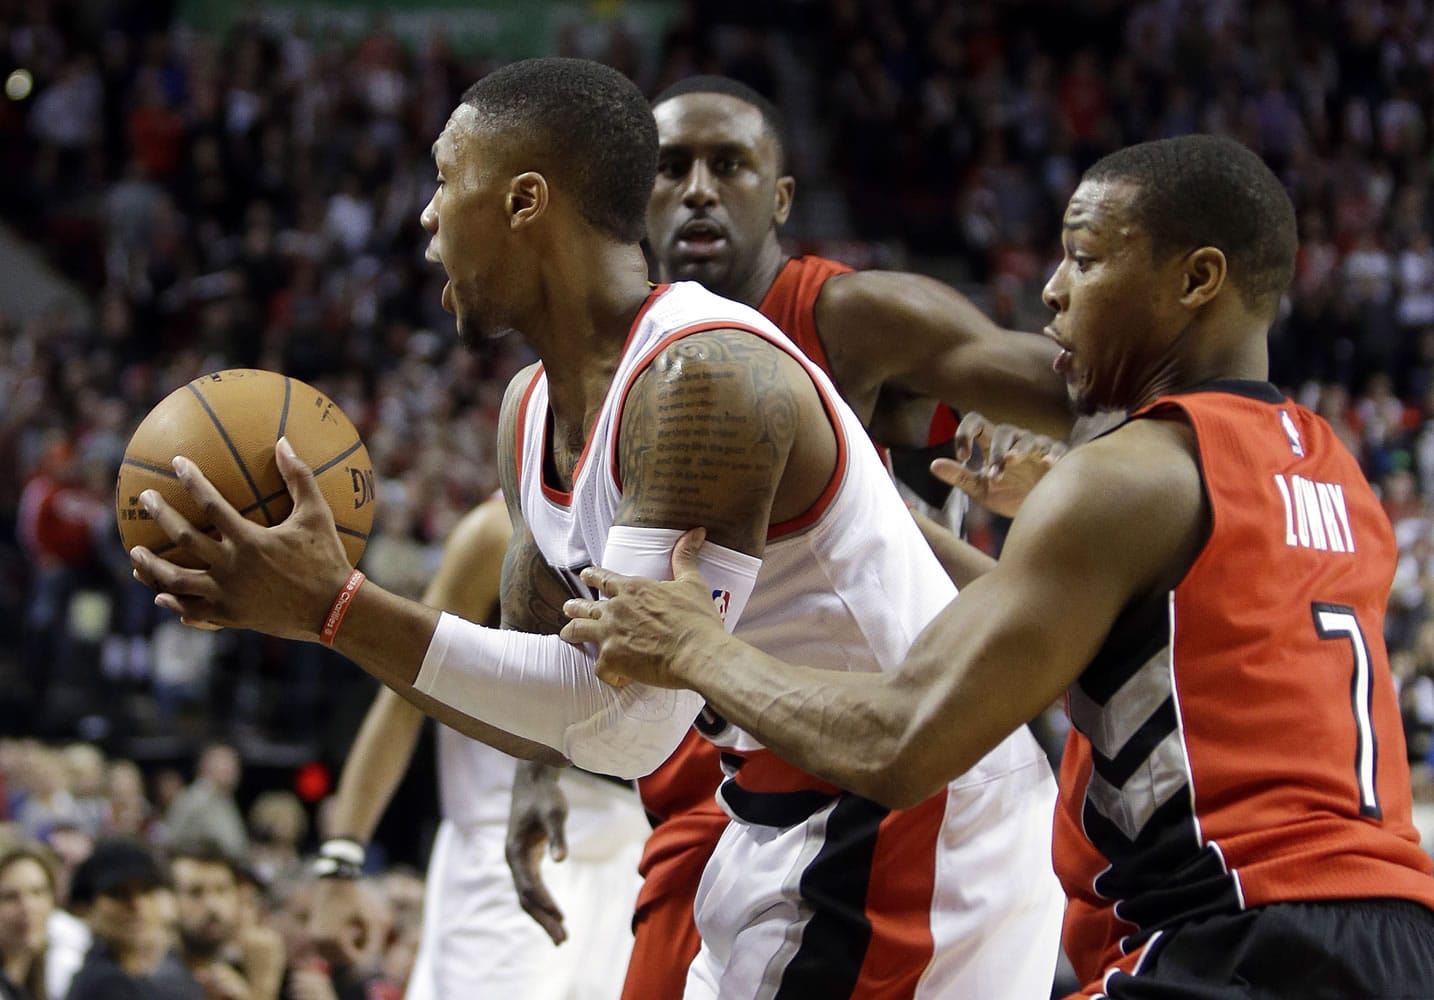 Portland Trail Blazers guard Damian Lillard, left, is fouled from behind by Toronto Raptors guard Kyle Lowry during overtime of an NBA basketball game in Portland, Ore., Tuesday, Dec. 30, 2014. Lillard led the Trail Blazers in scoring with 26 ponts as they beat the Raptors in overtime 102-97.